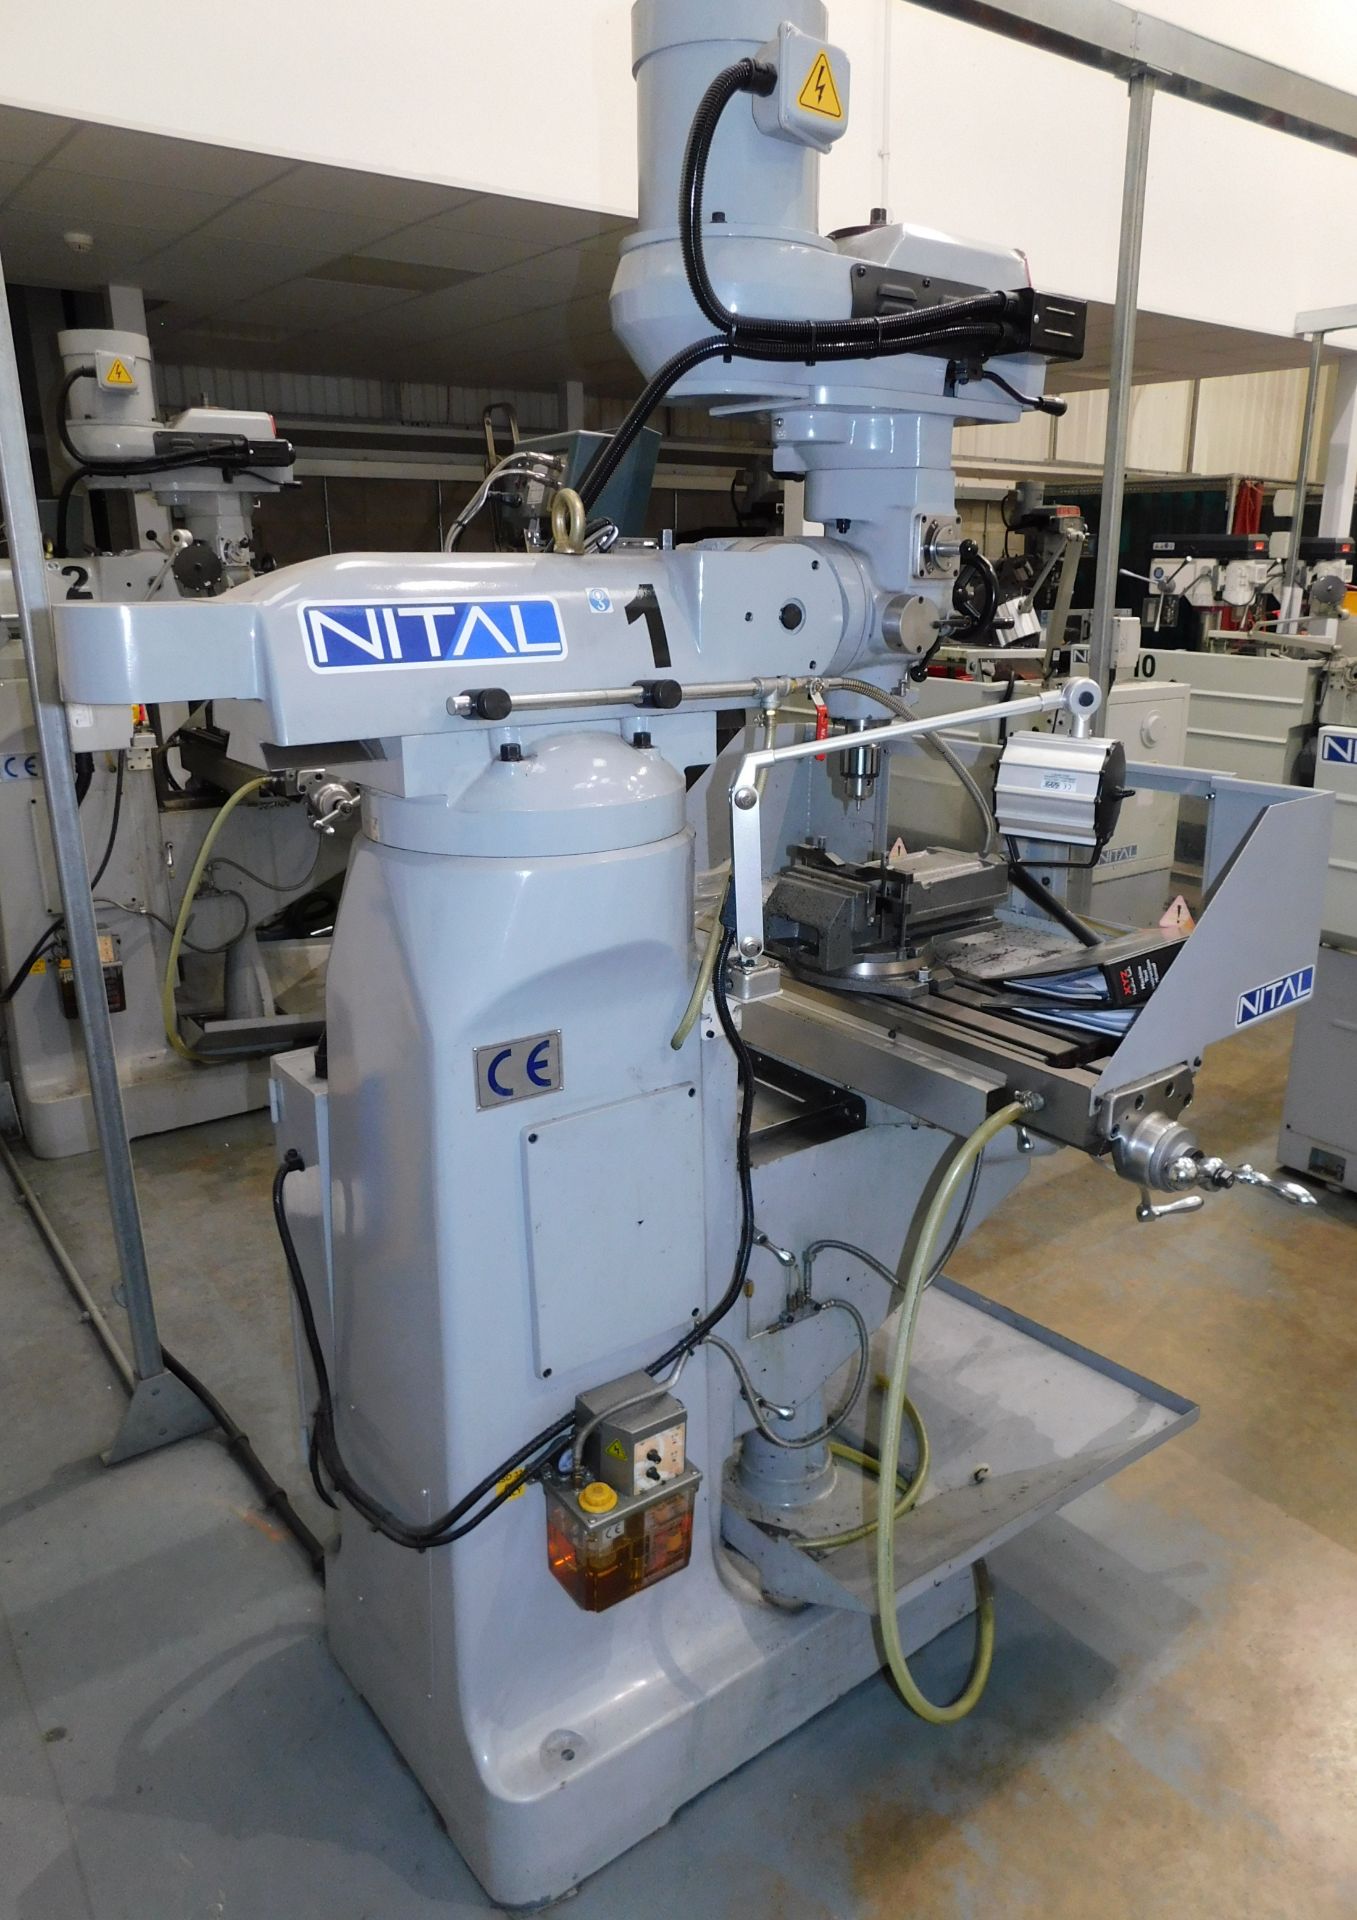 XYZ 1500 Turret Mill (2015), serial number 104012, 3 HP Variable Speed Head, 1069 x 228mm Table & - Image 9 of 9